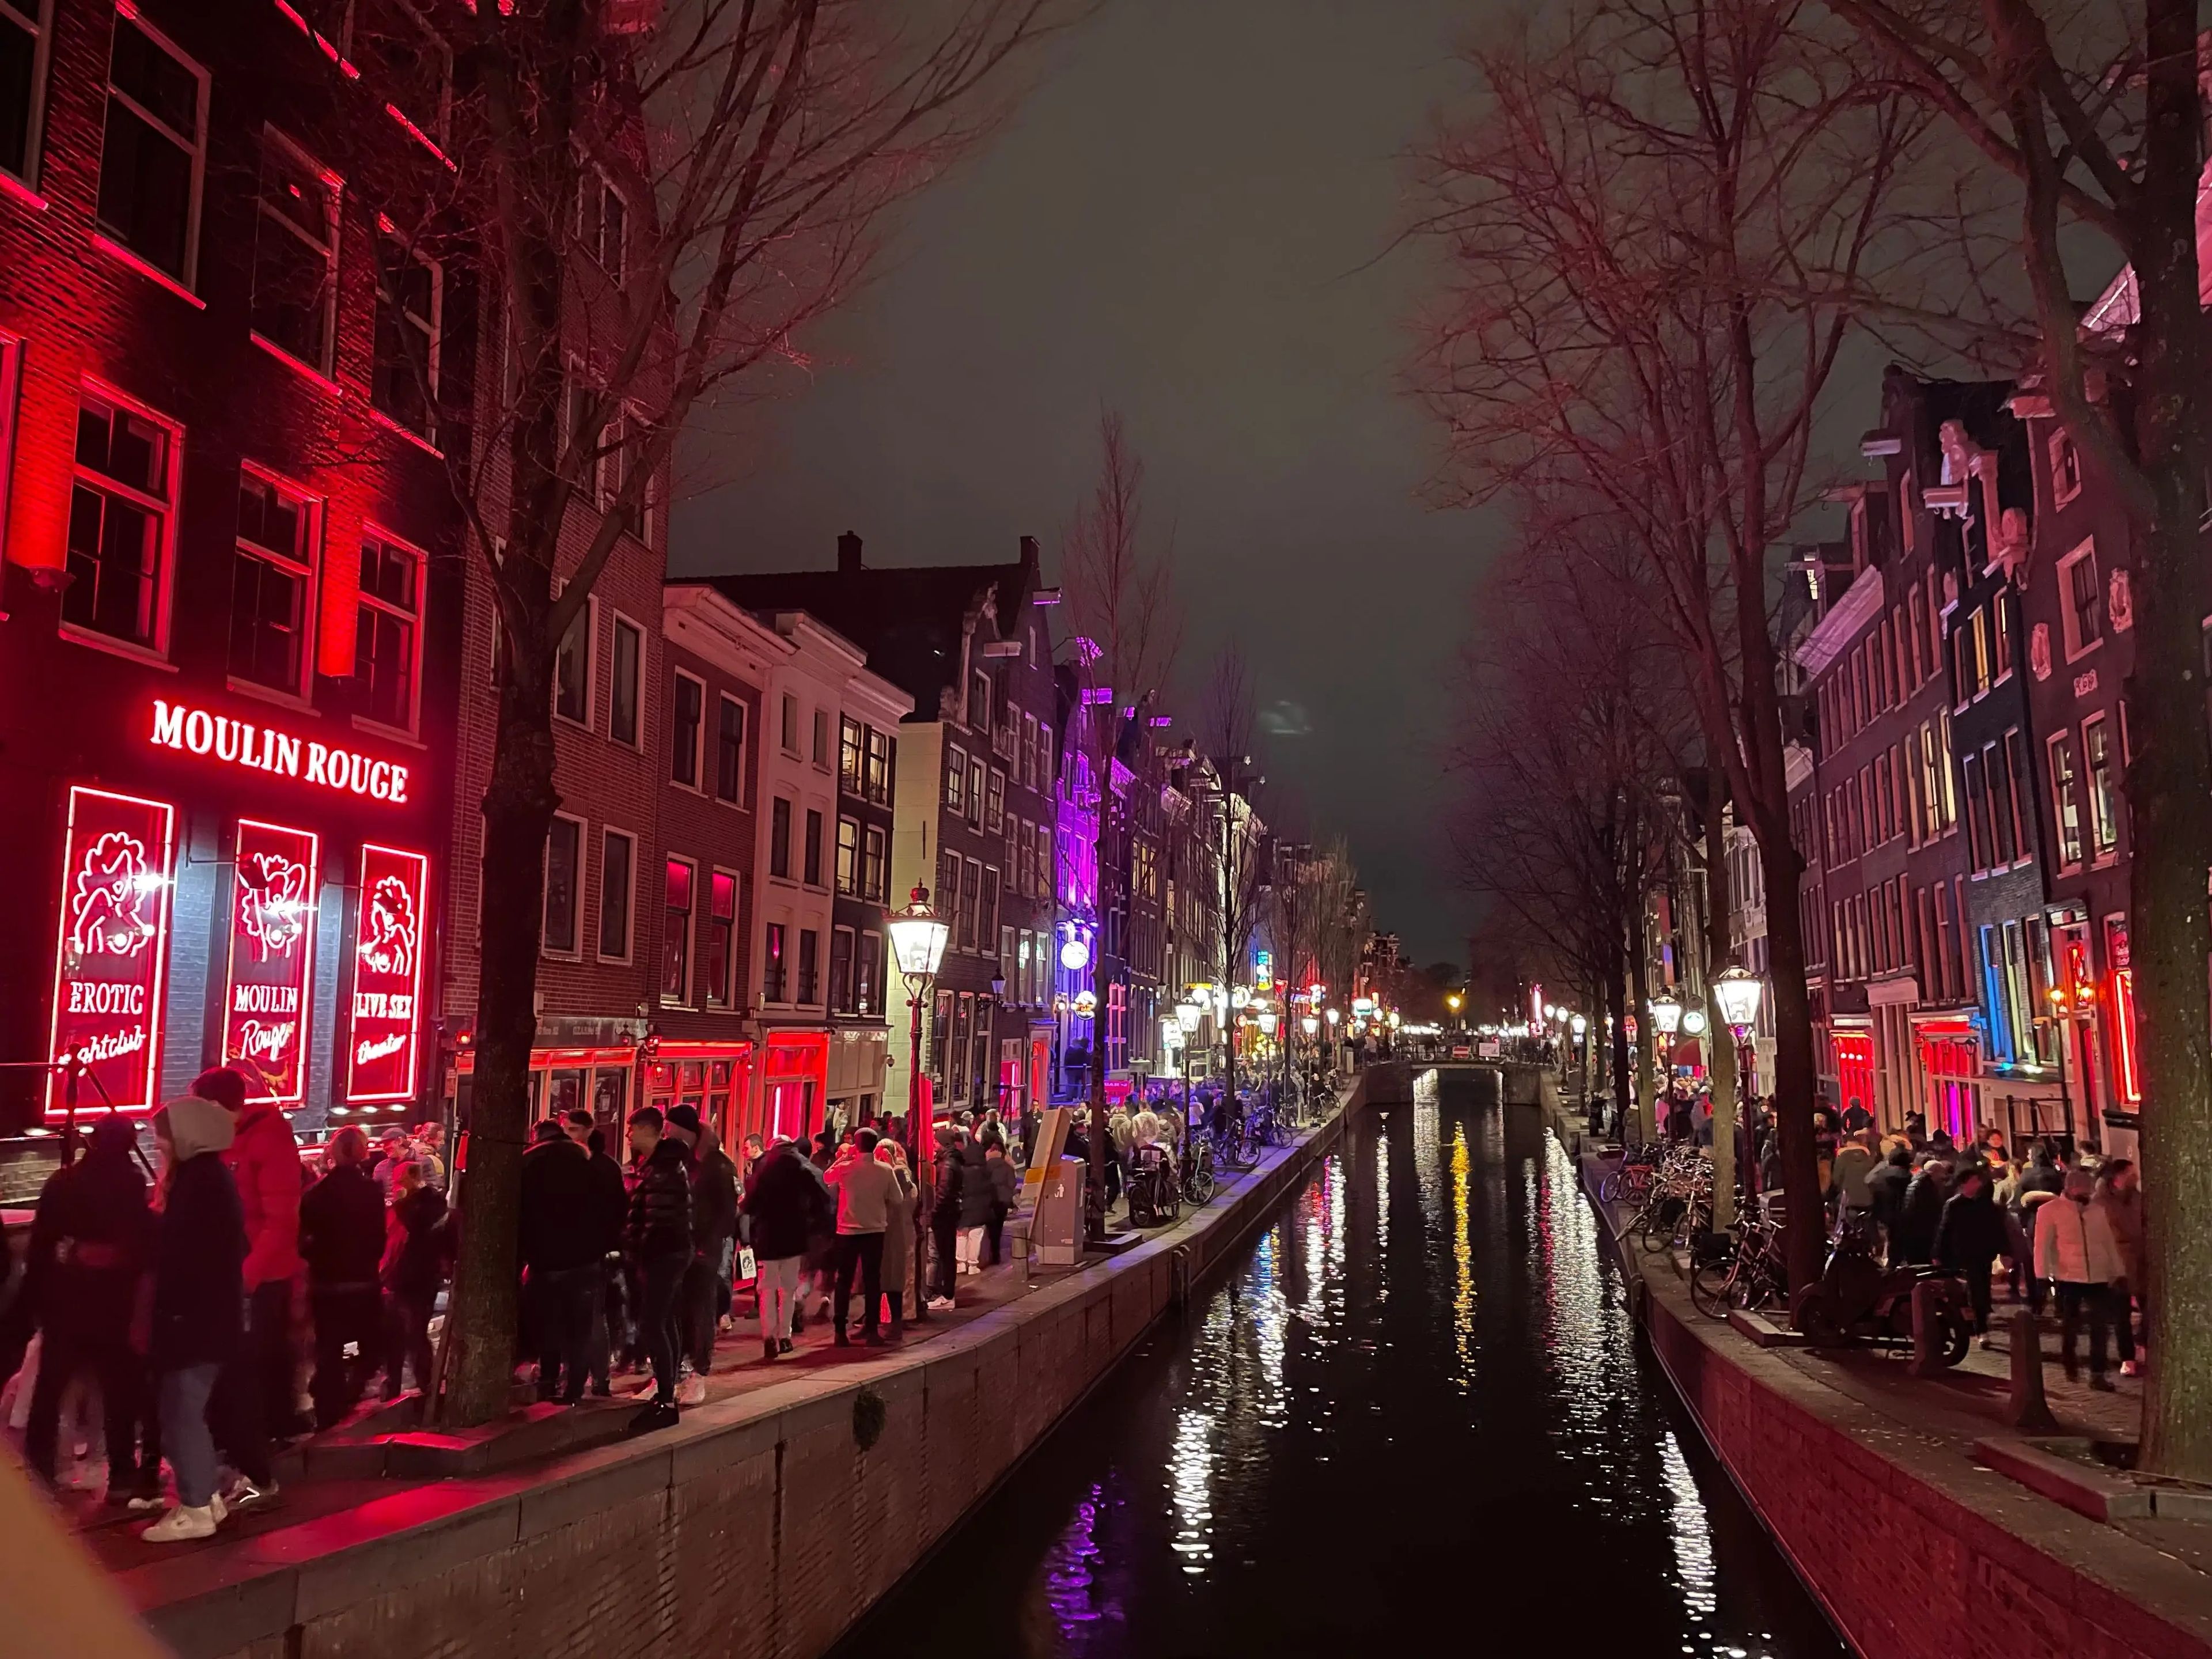 shot of the red light district in amsterdam at night